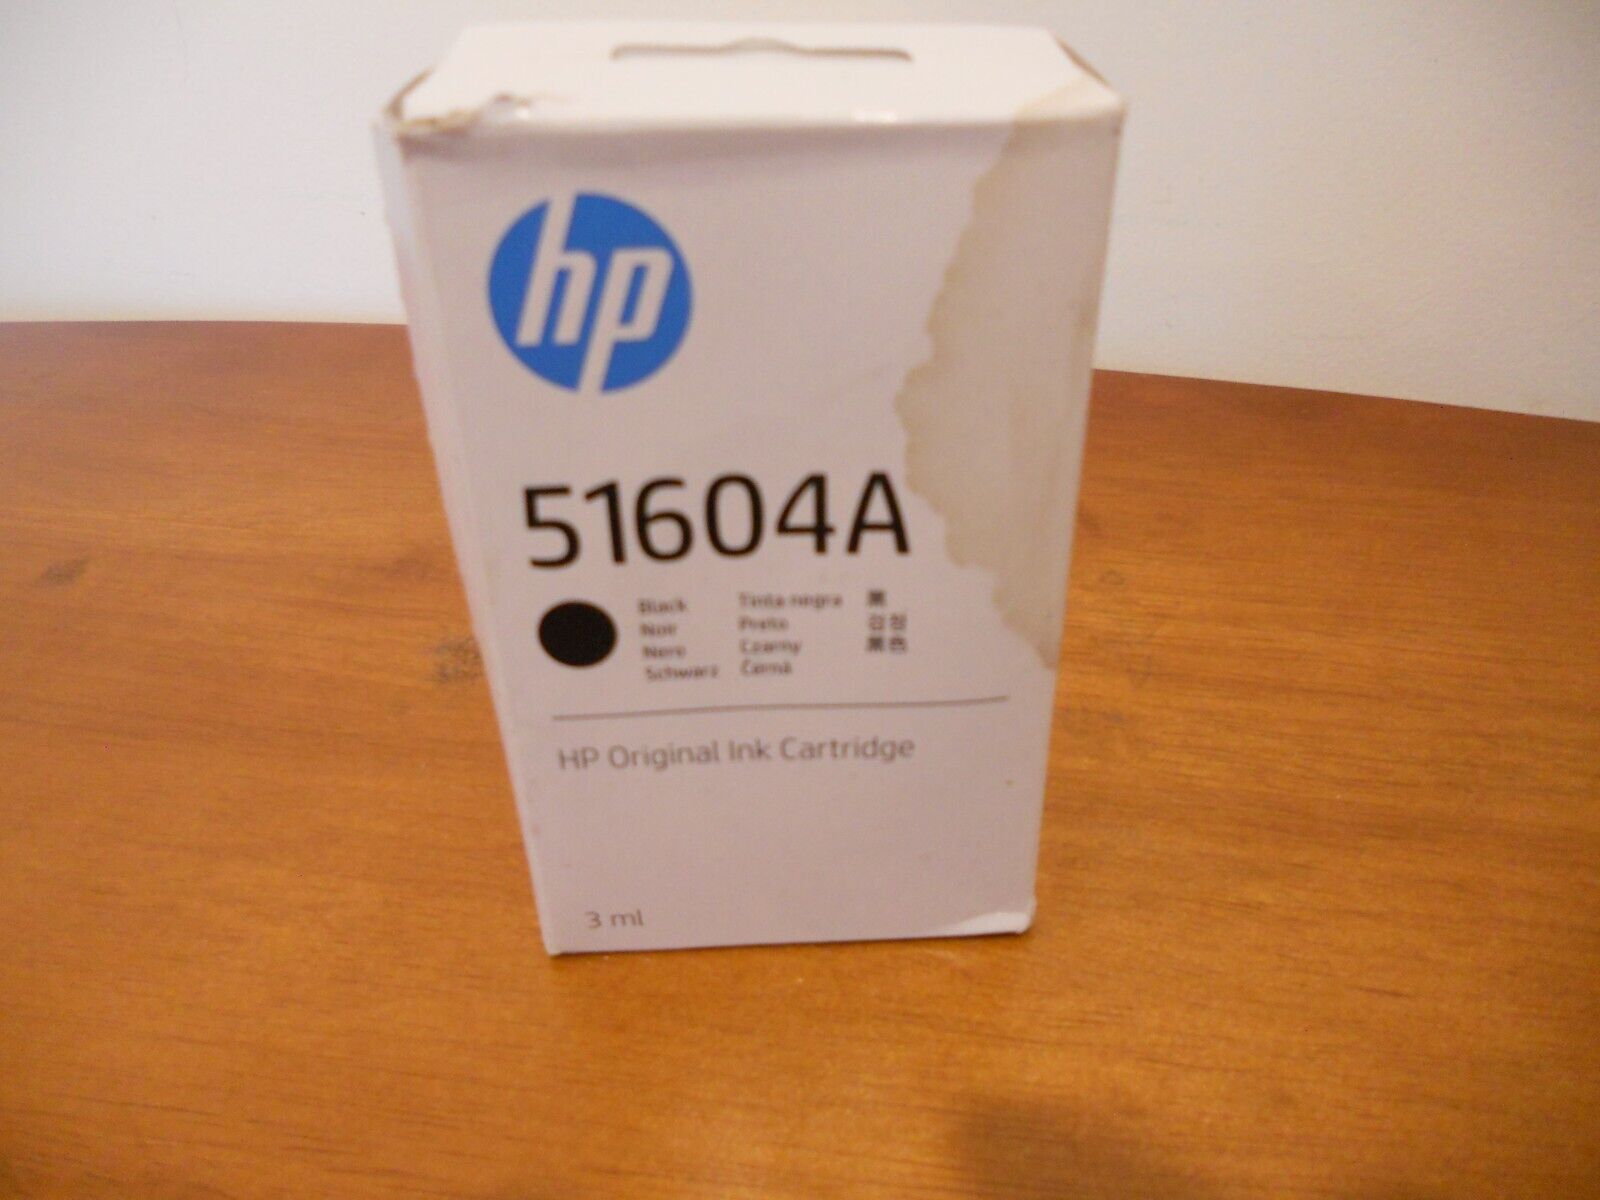 Black Genuine HP 51604A Ink Cartridge Quietjet 2228A NEW DATED 3/2022